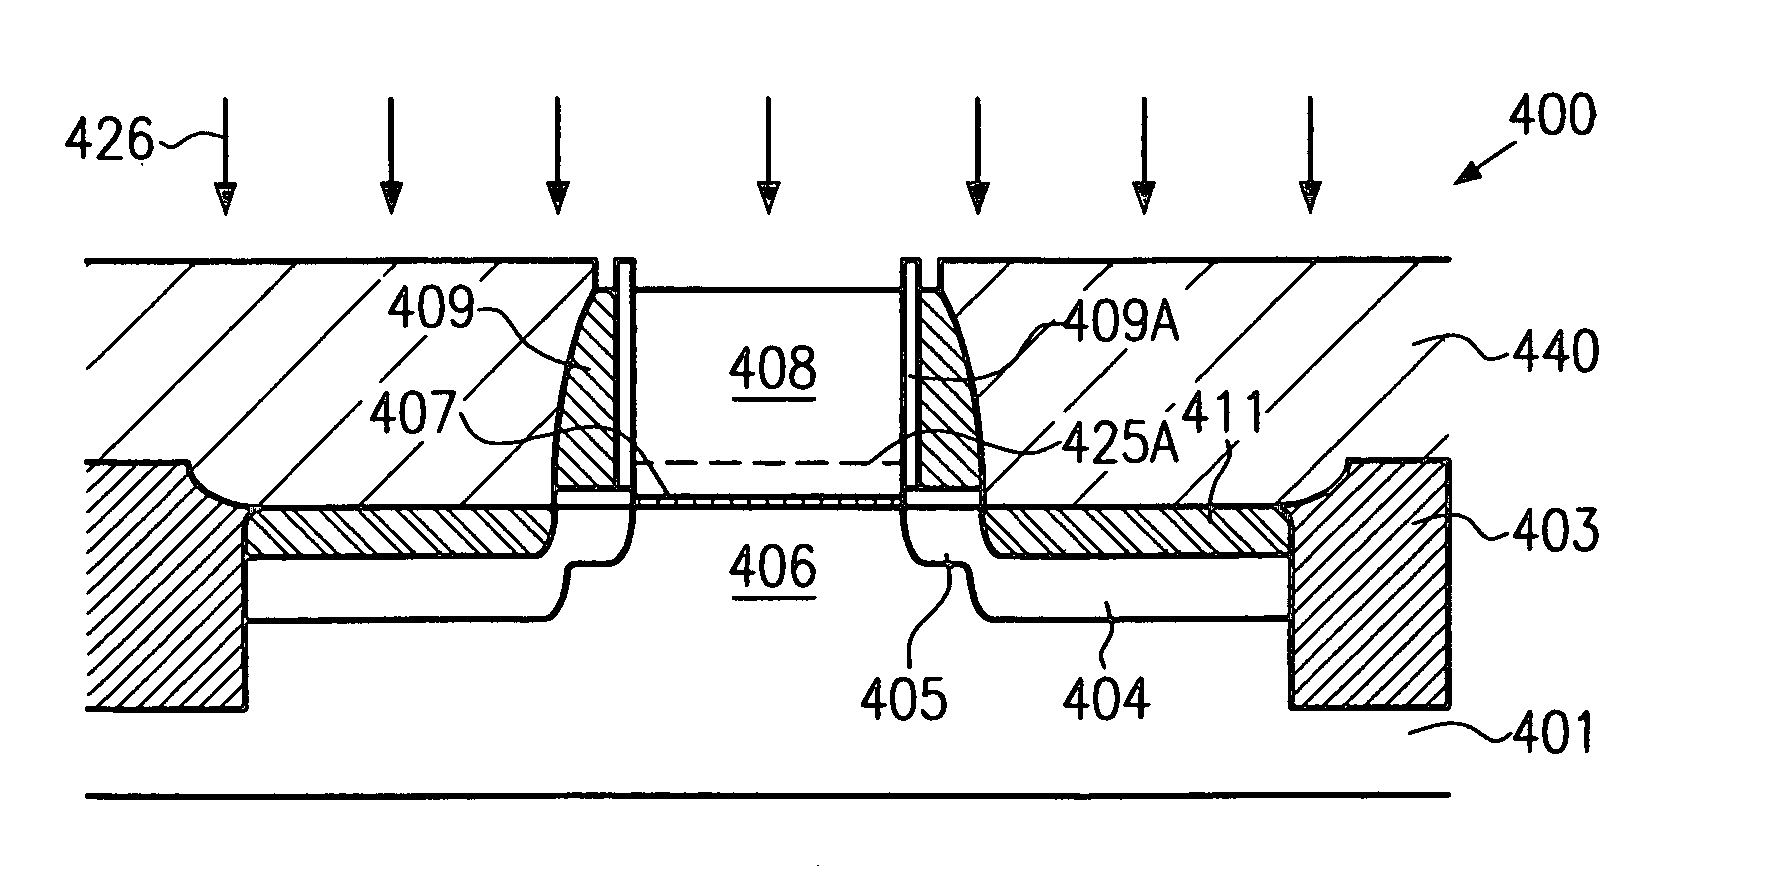 Polysilicon line having a metal silicide region enabling linewidth scaling